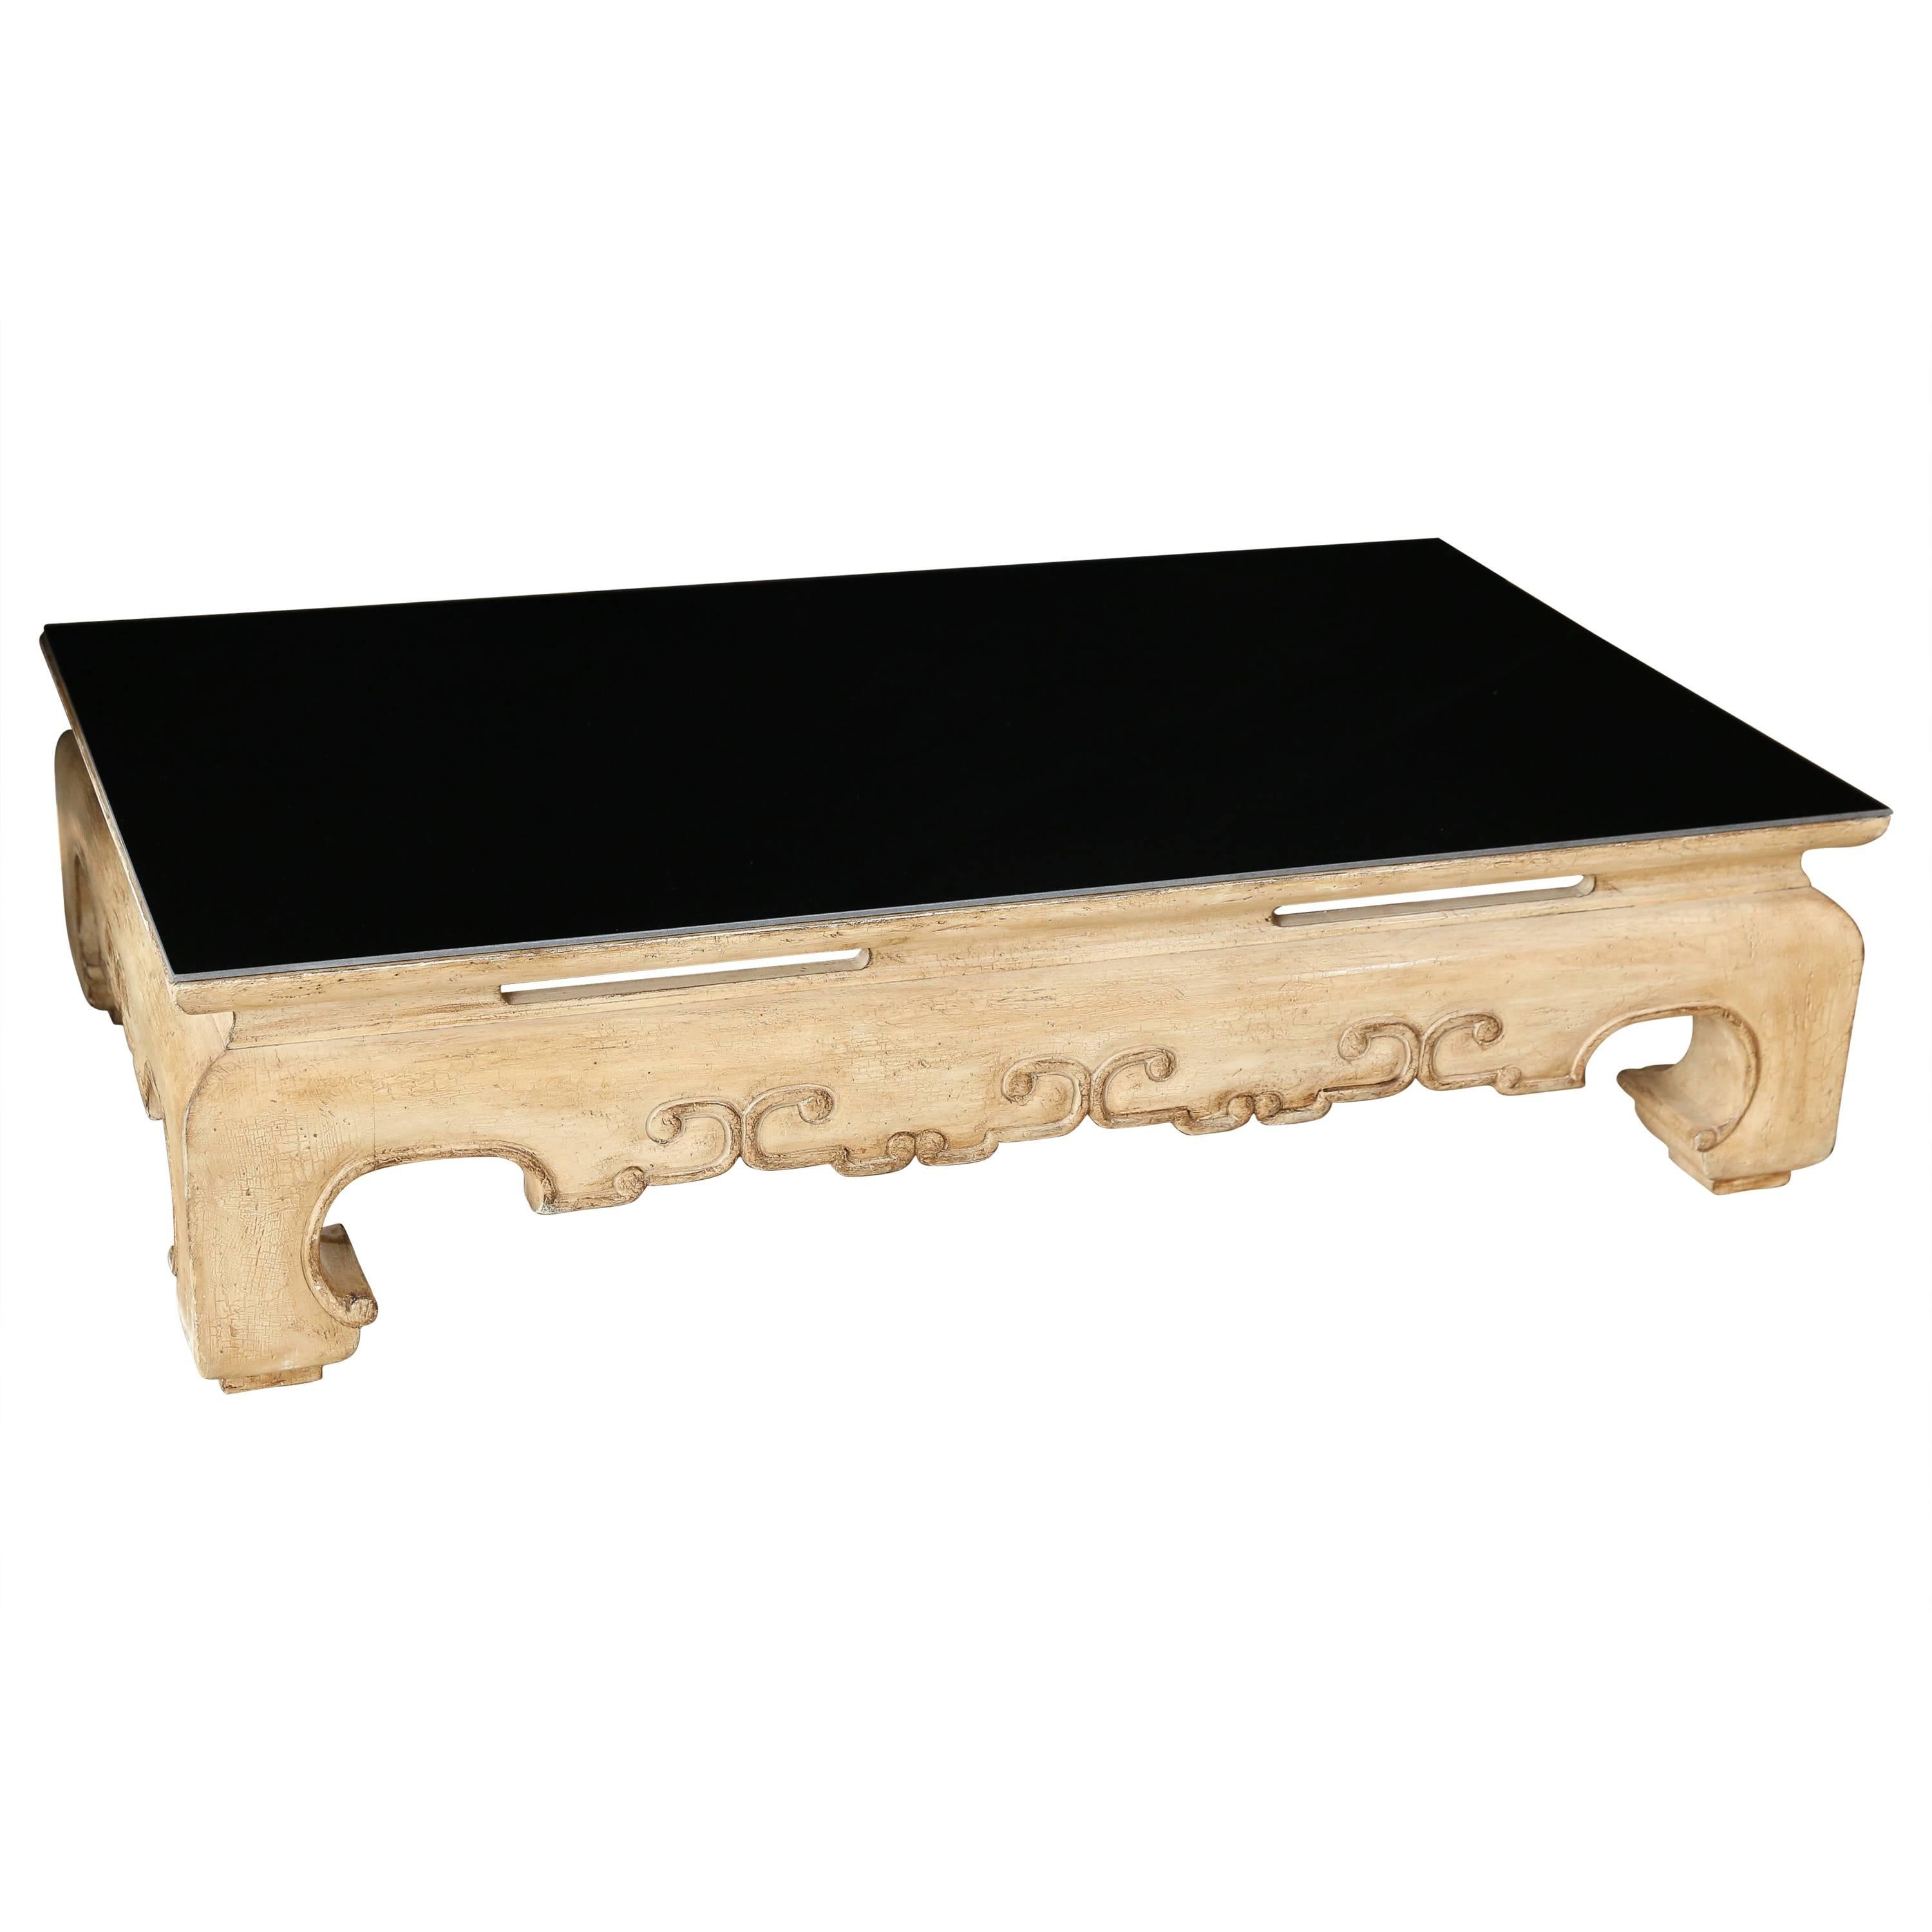 20th Century Black Mirrored Top with Chinese Style Base Coffee Table